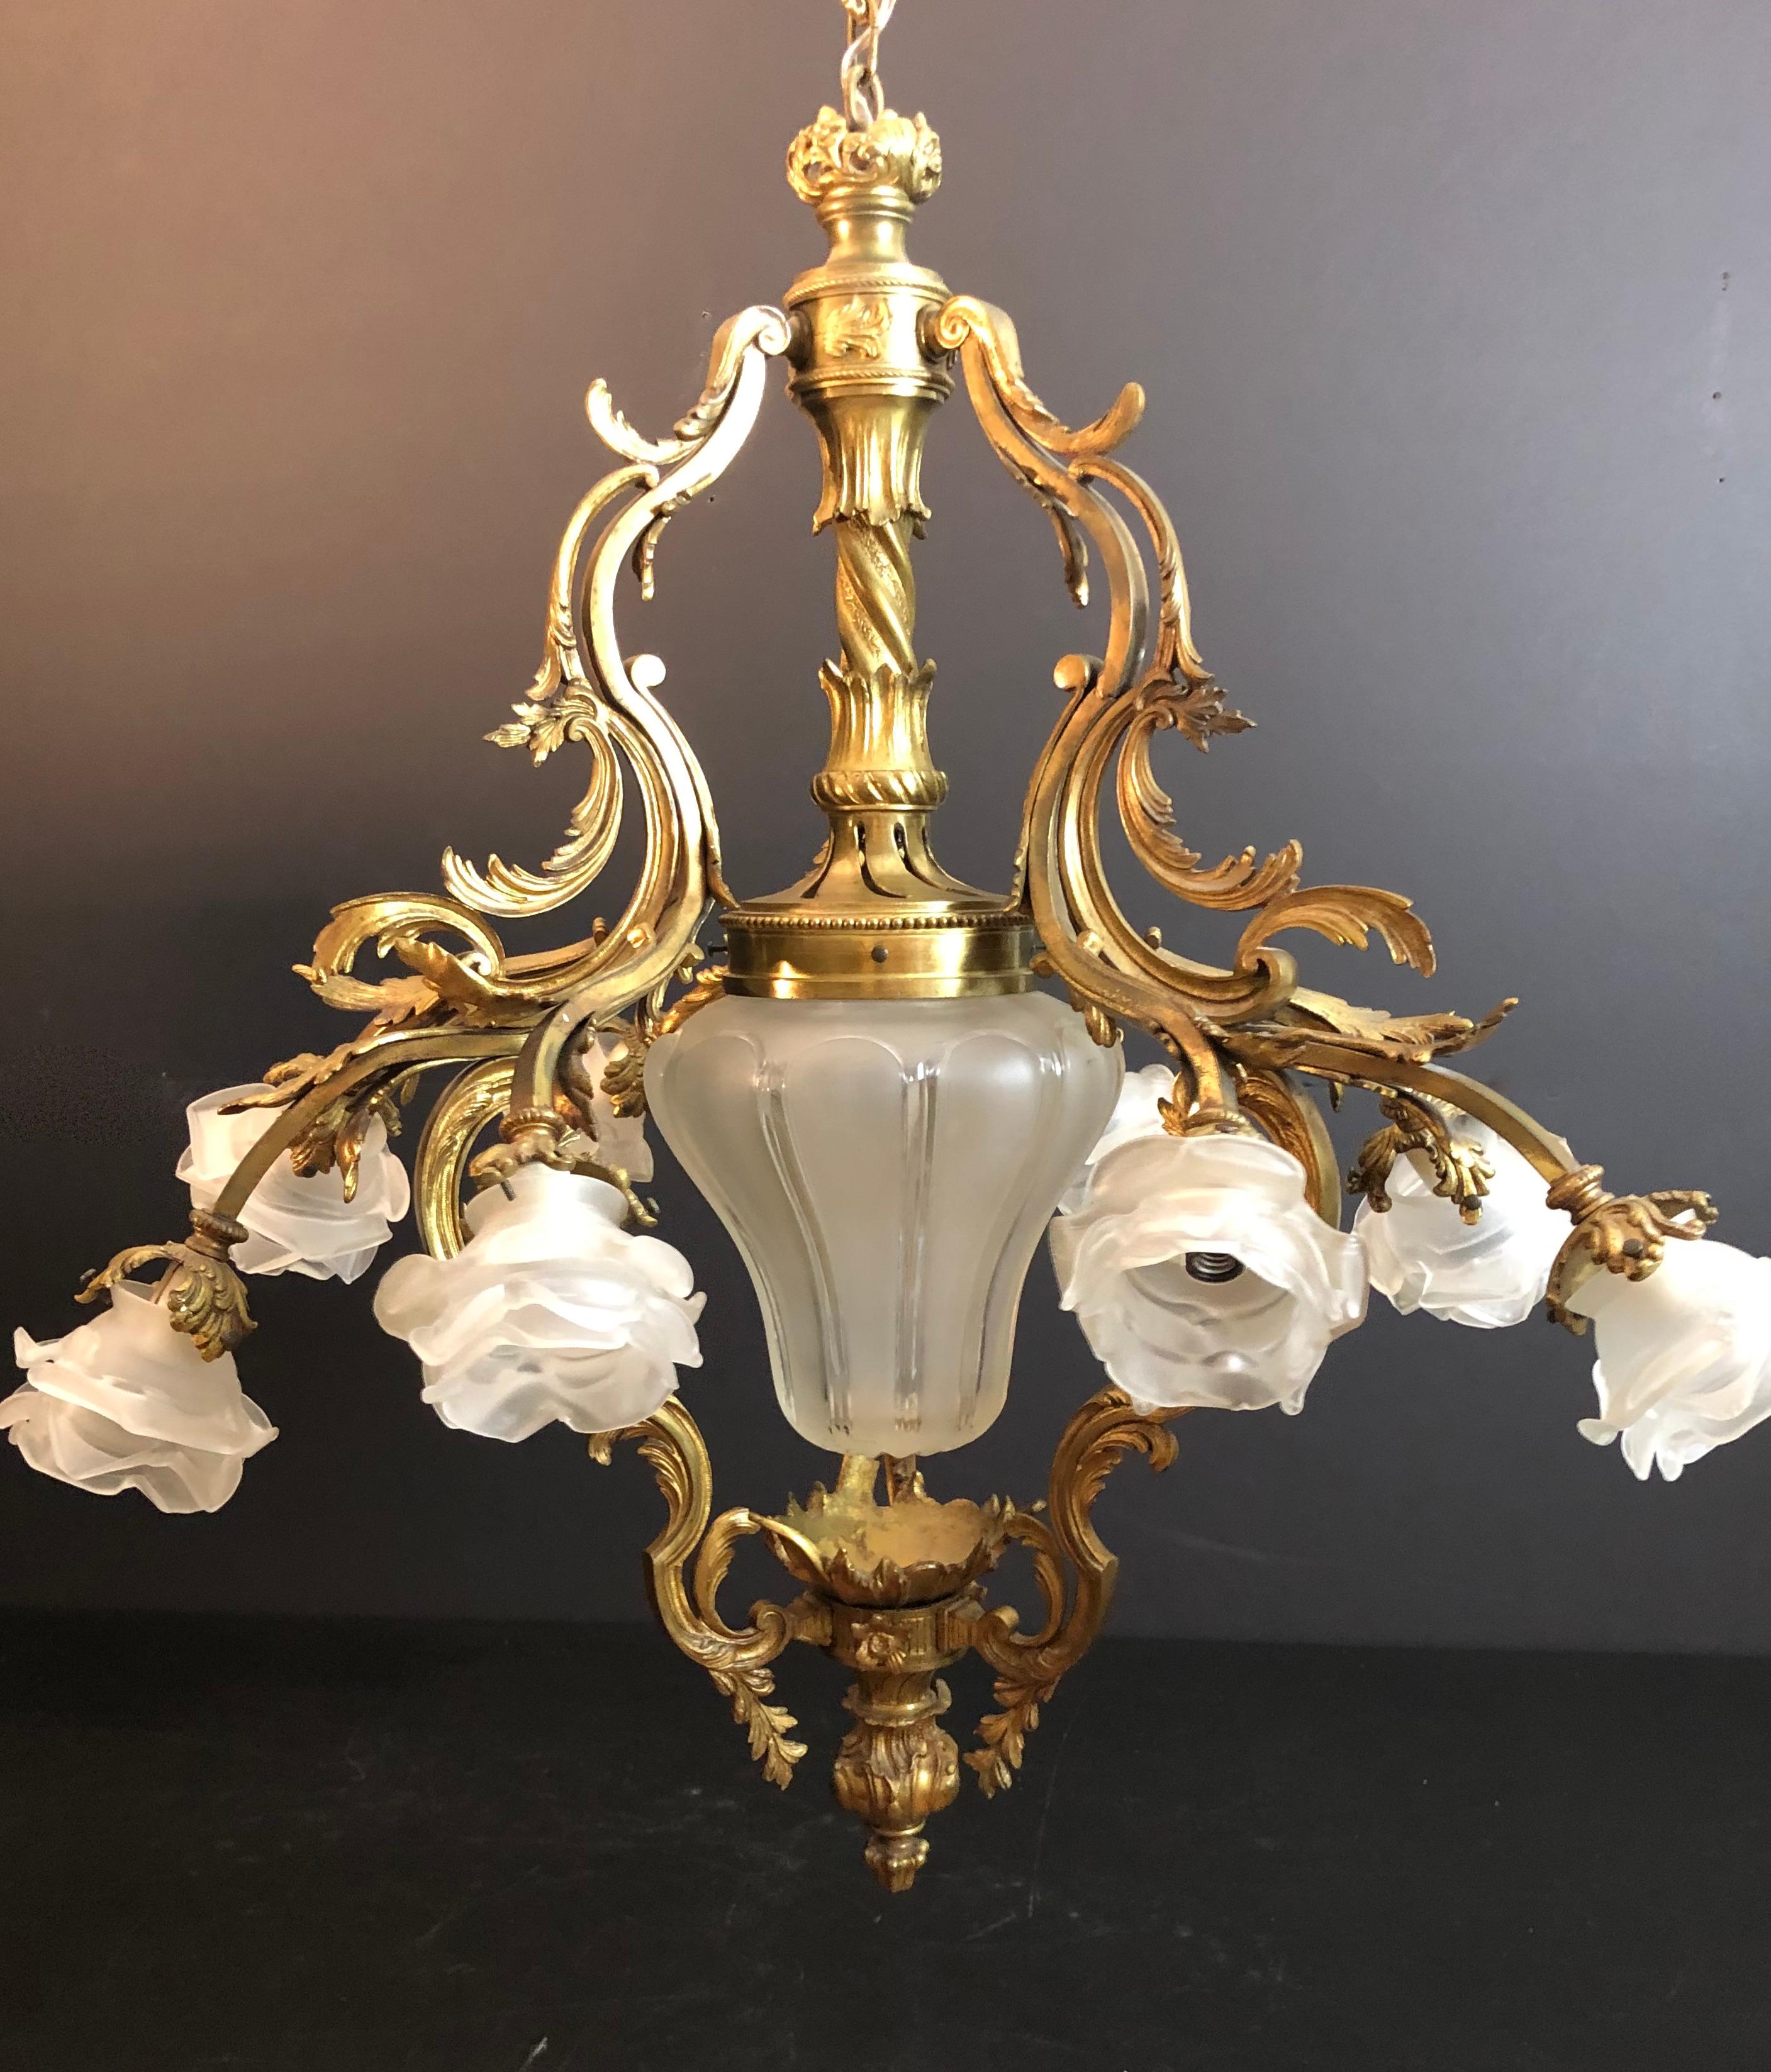 Rococo Gilt Bronze Chandelier In The Louis XV Style  For Sale